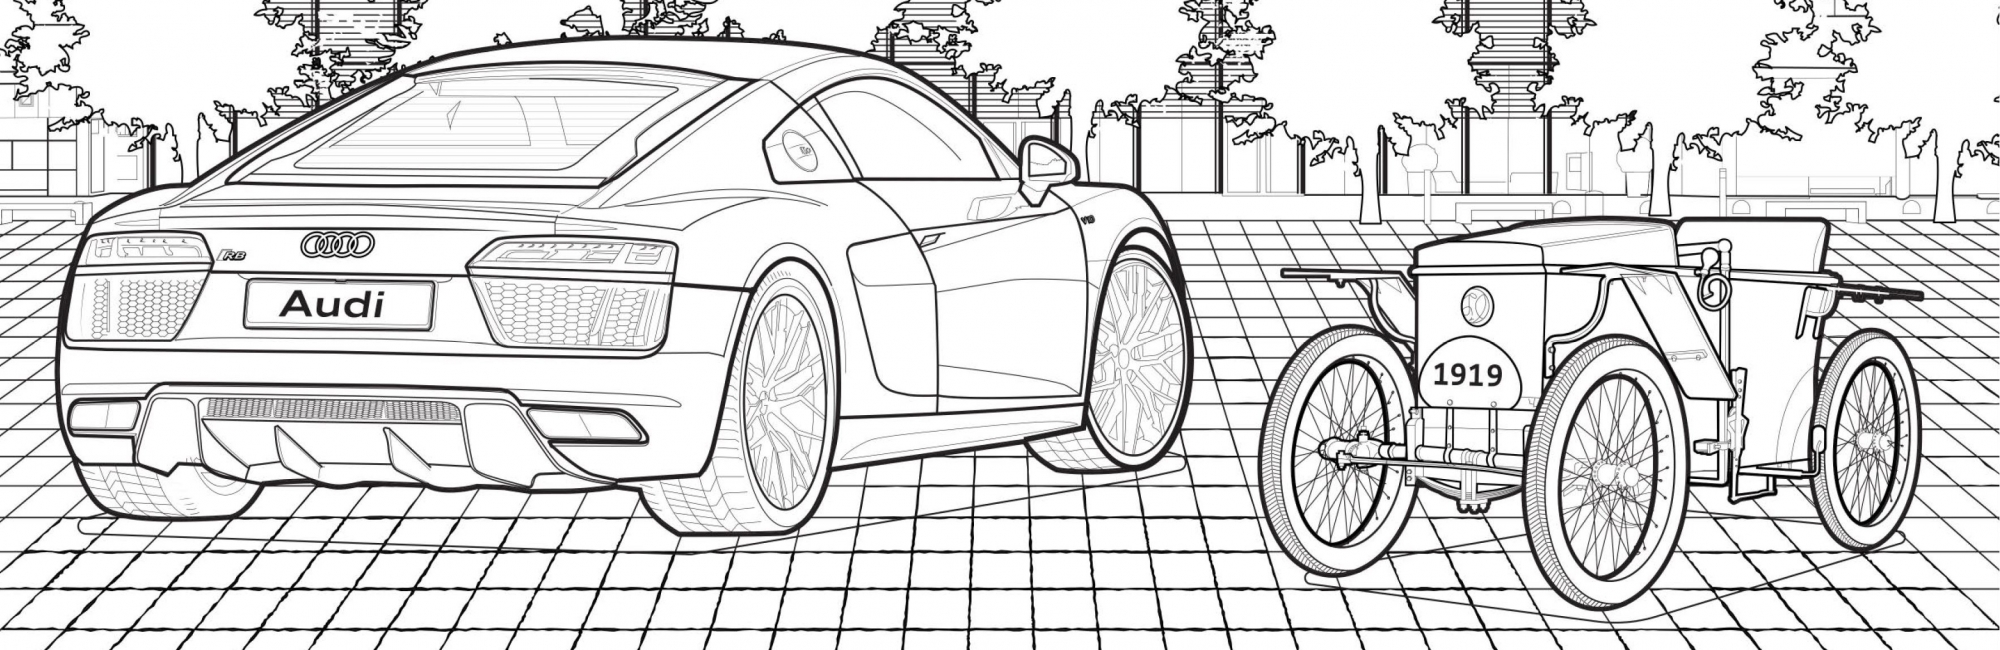 Quarantine Got You Down Check Out Audi S Free Coloring Book Or Tour A Virtual Car Museum Carscoops